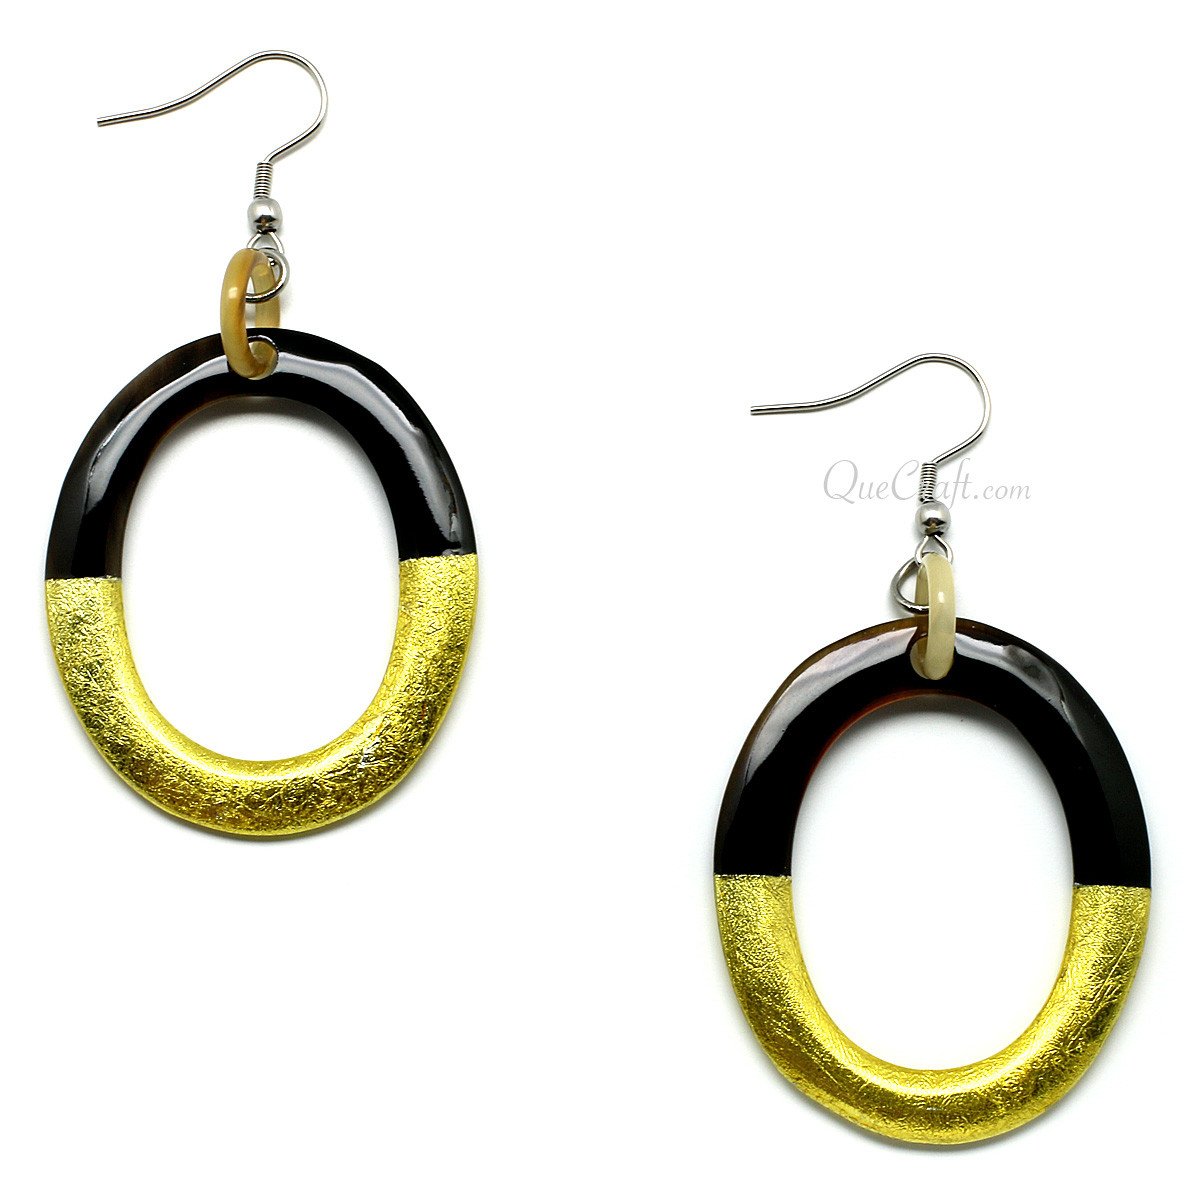 Horn & Lacquer Earrings #11173 - HORN JEWELRY